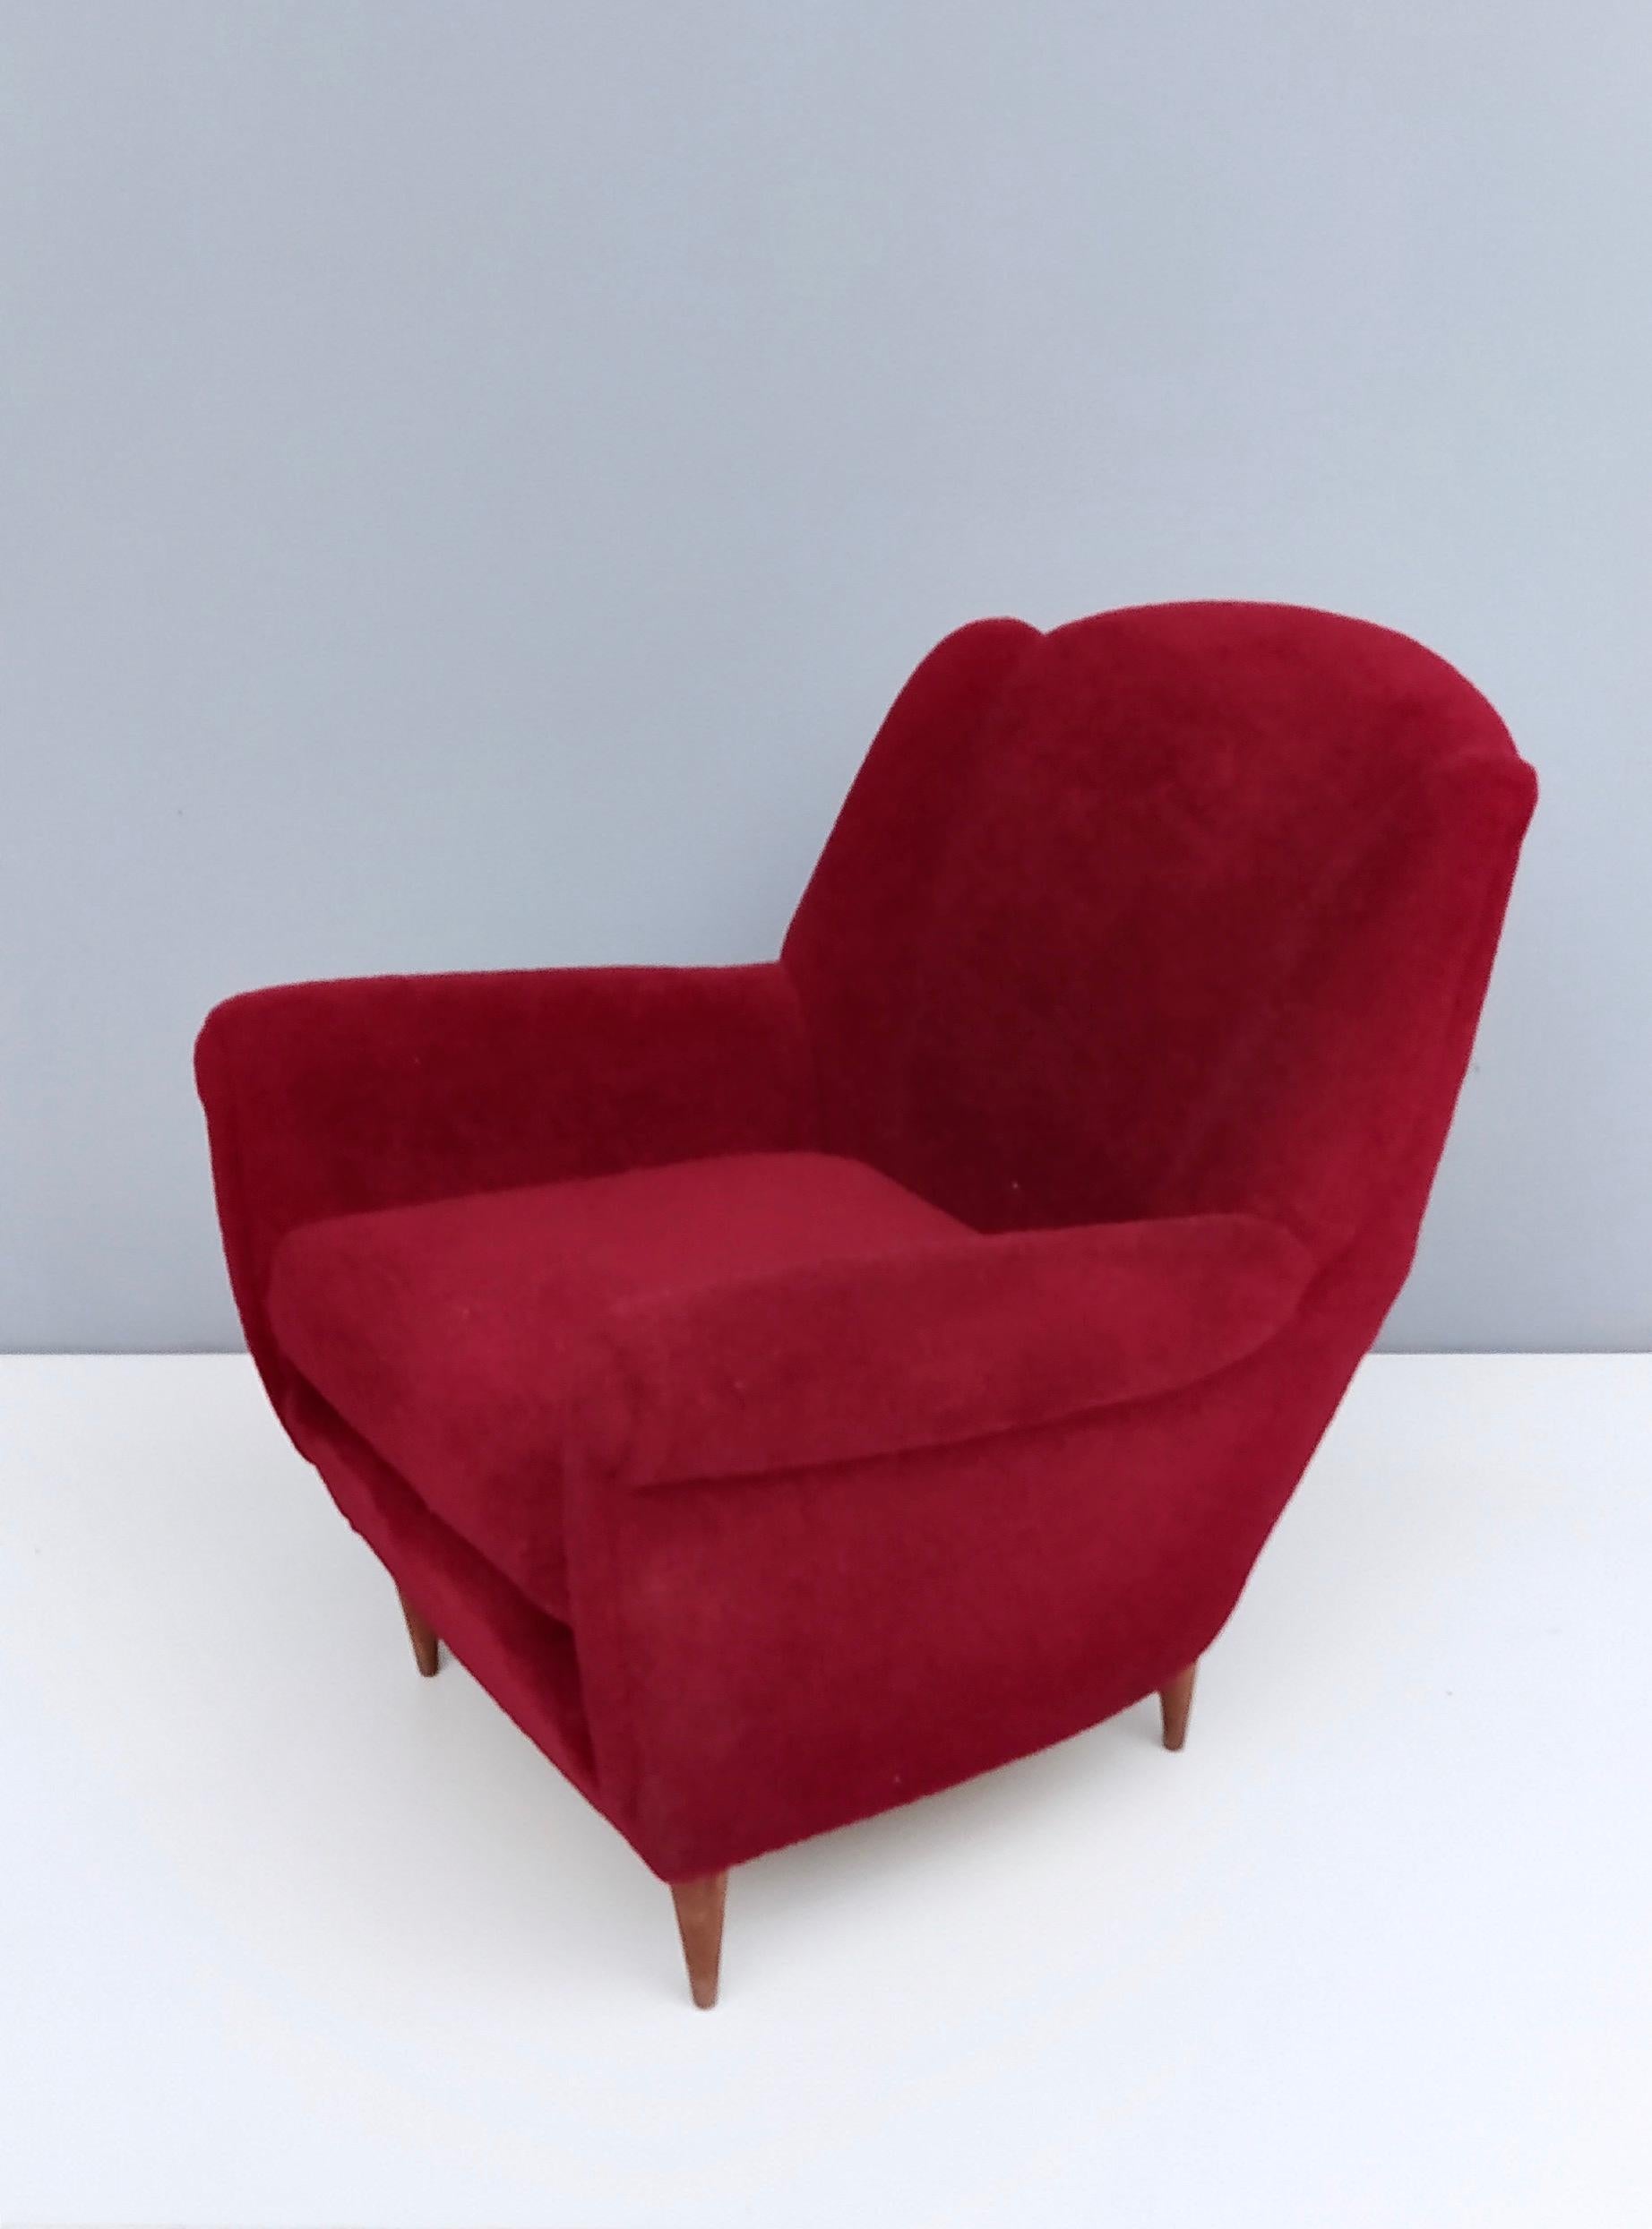 Fabric Pair of Crimson Upholstered Armchairs by Gigi Radice for Minotti, Italy, 1950s